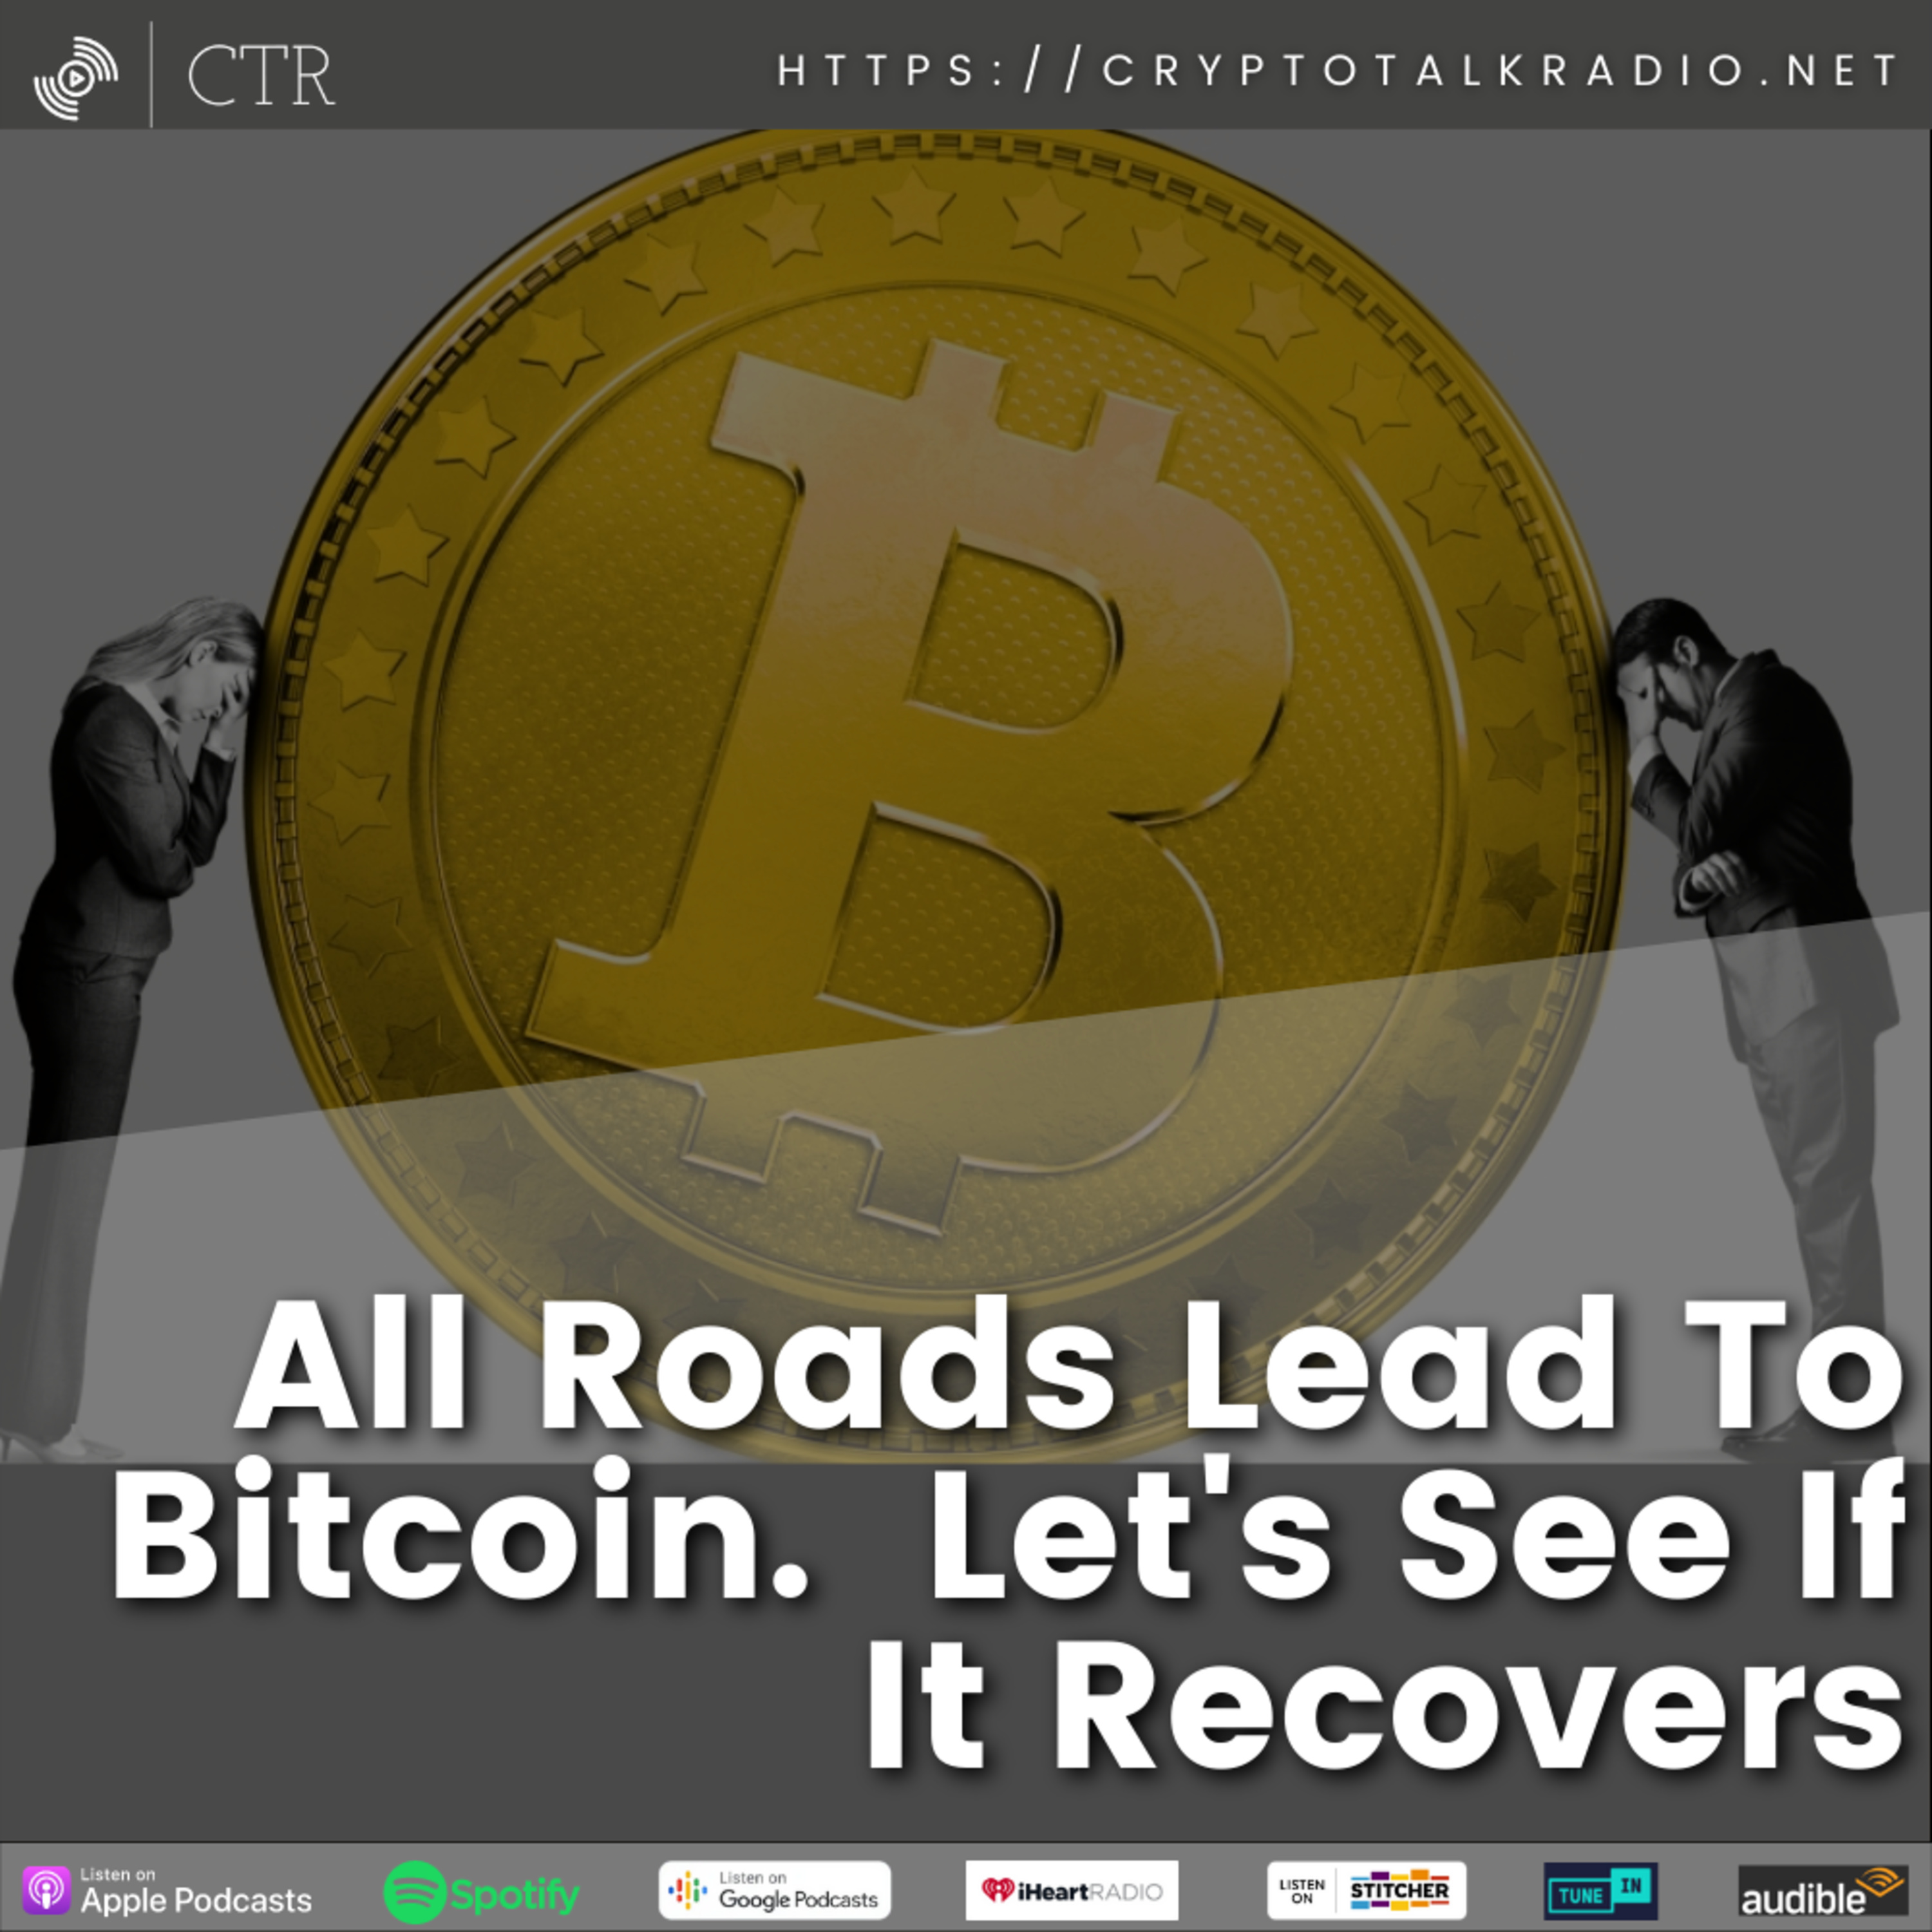 All Roads Lead To Bitcoin. Let's See If It Recovers